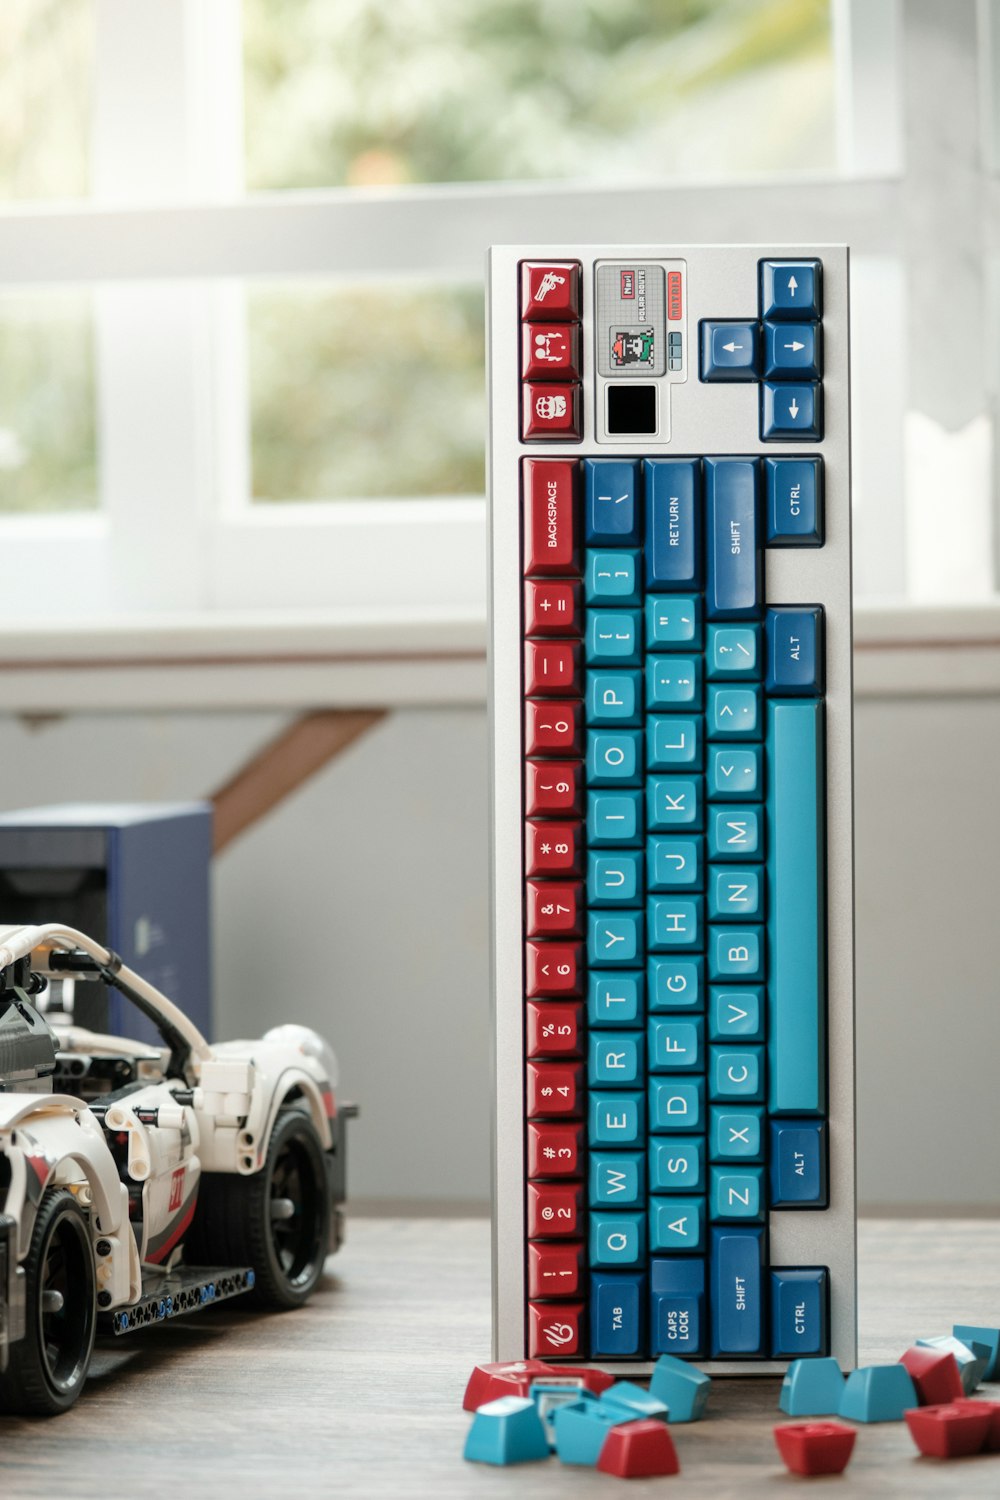 a toy car and a computer keyboard on a table